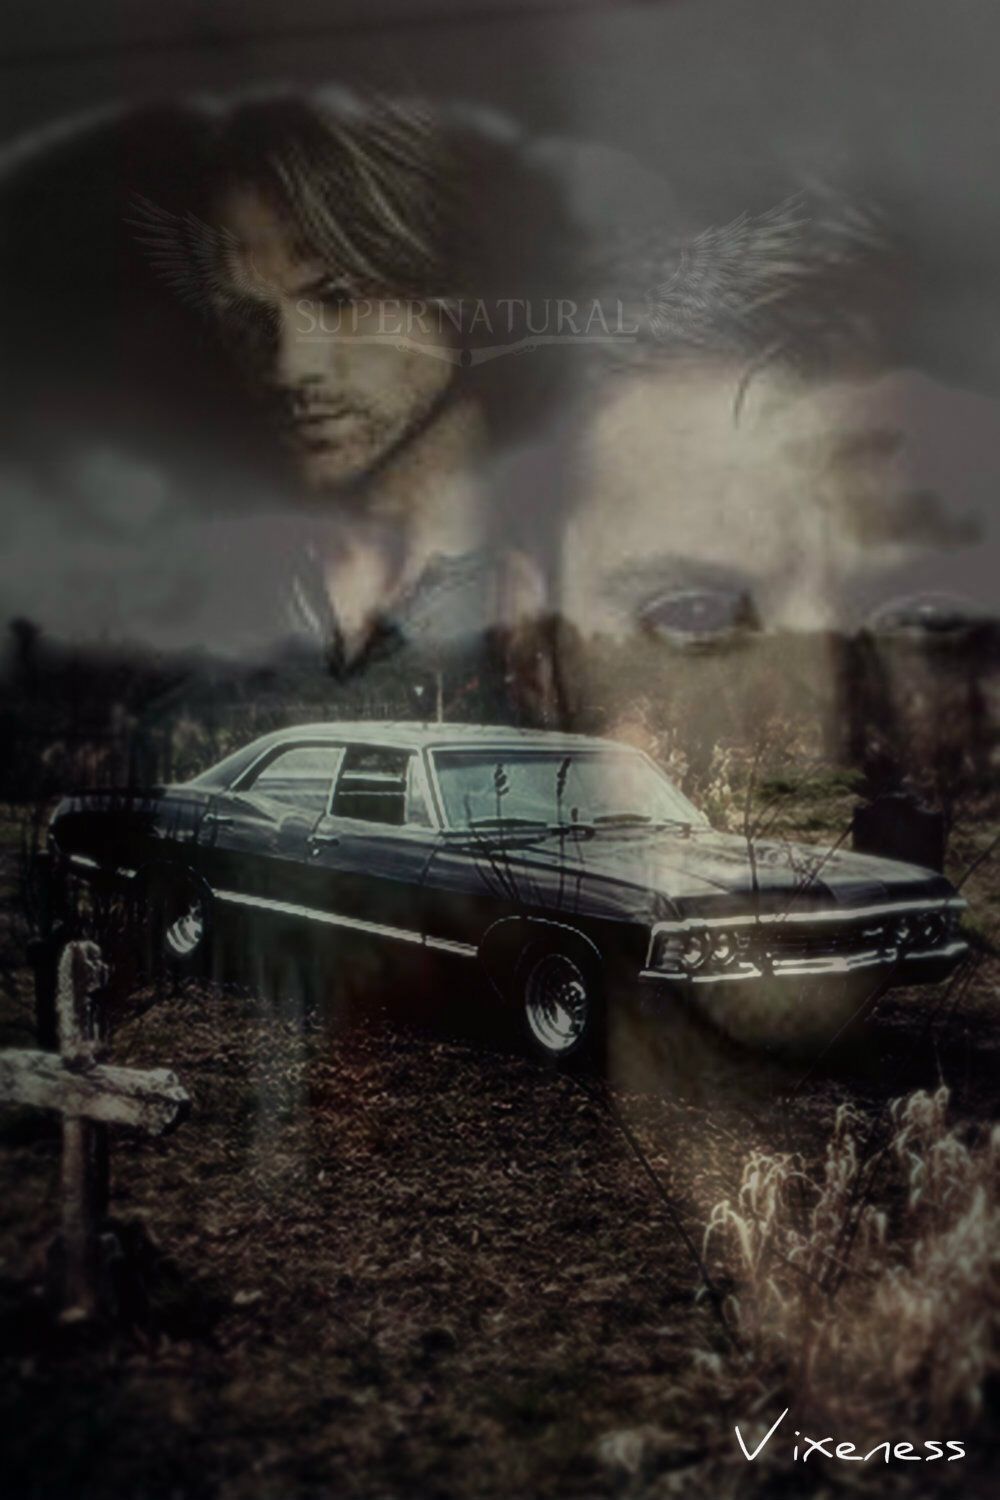 Supernatural 67 Chevy Impala iPhone Wallpaper By. Supernatural wallpaper, Supernatural baby, Supernatural